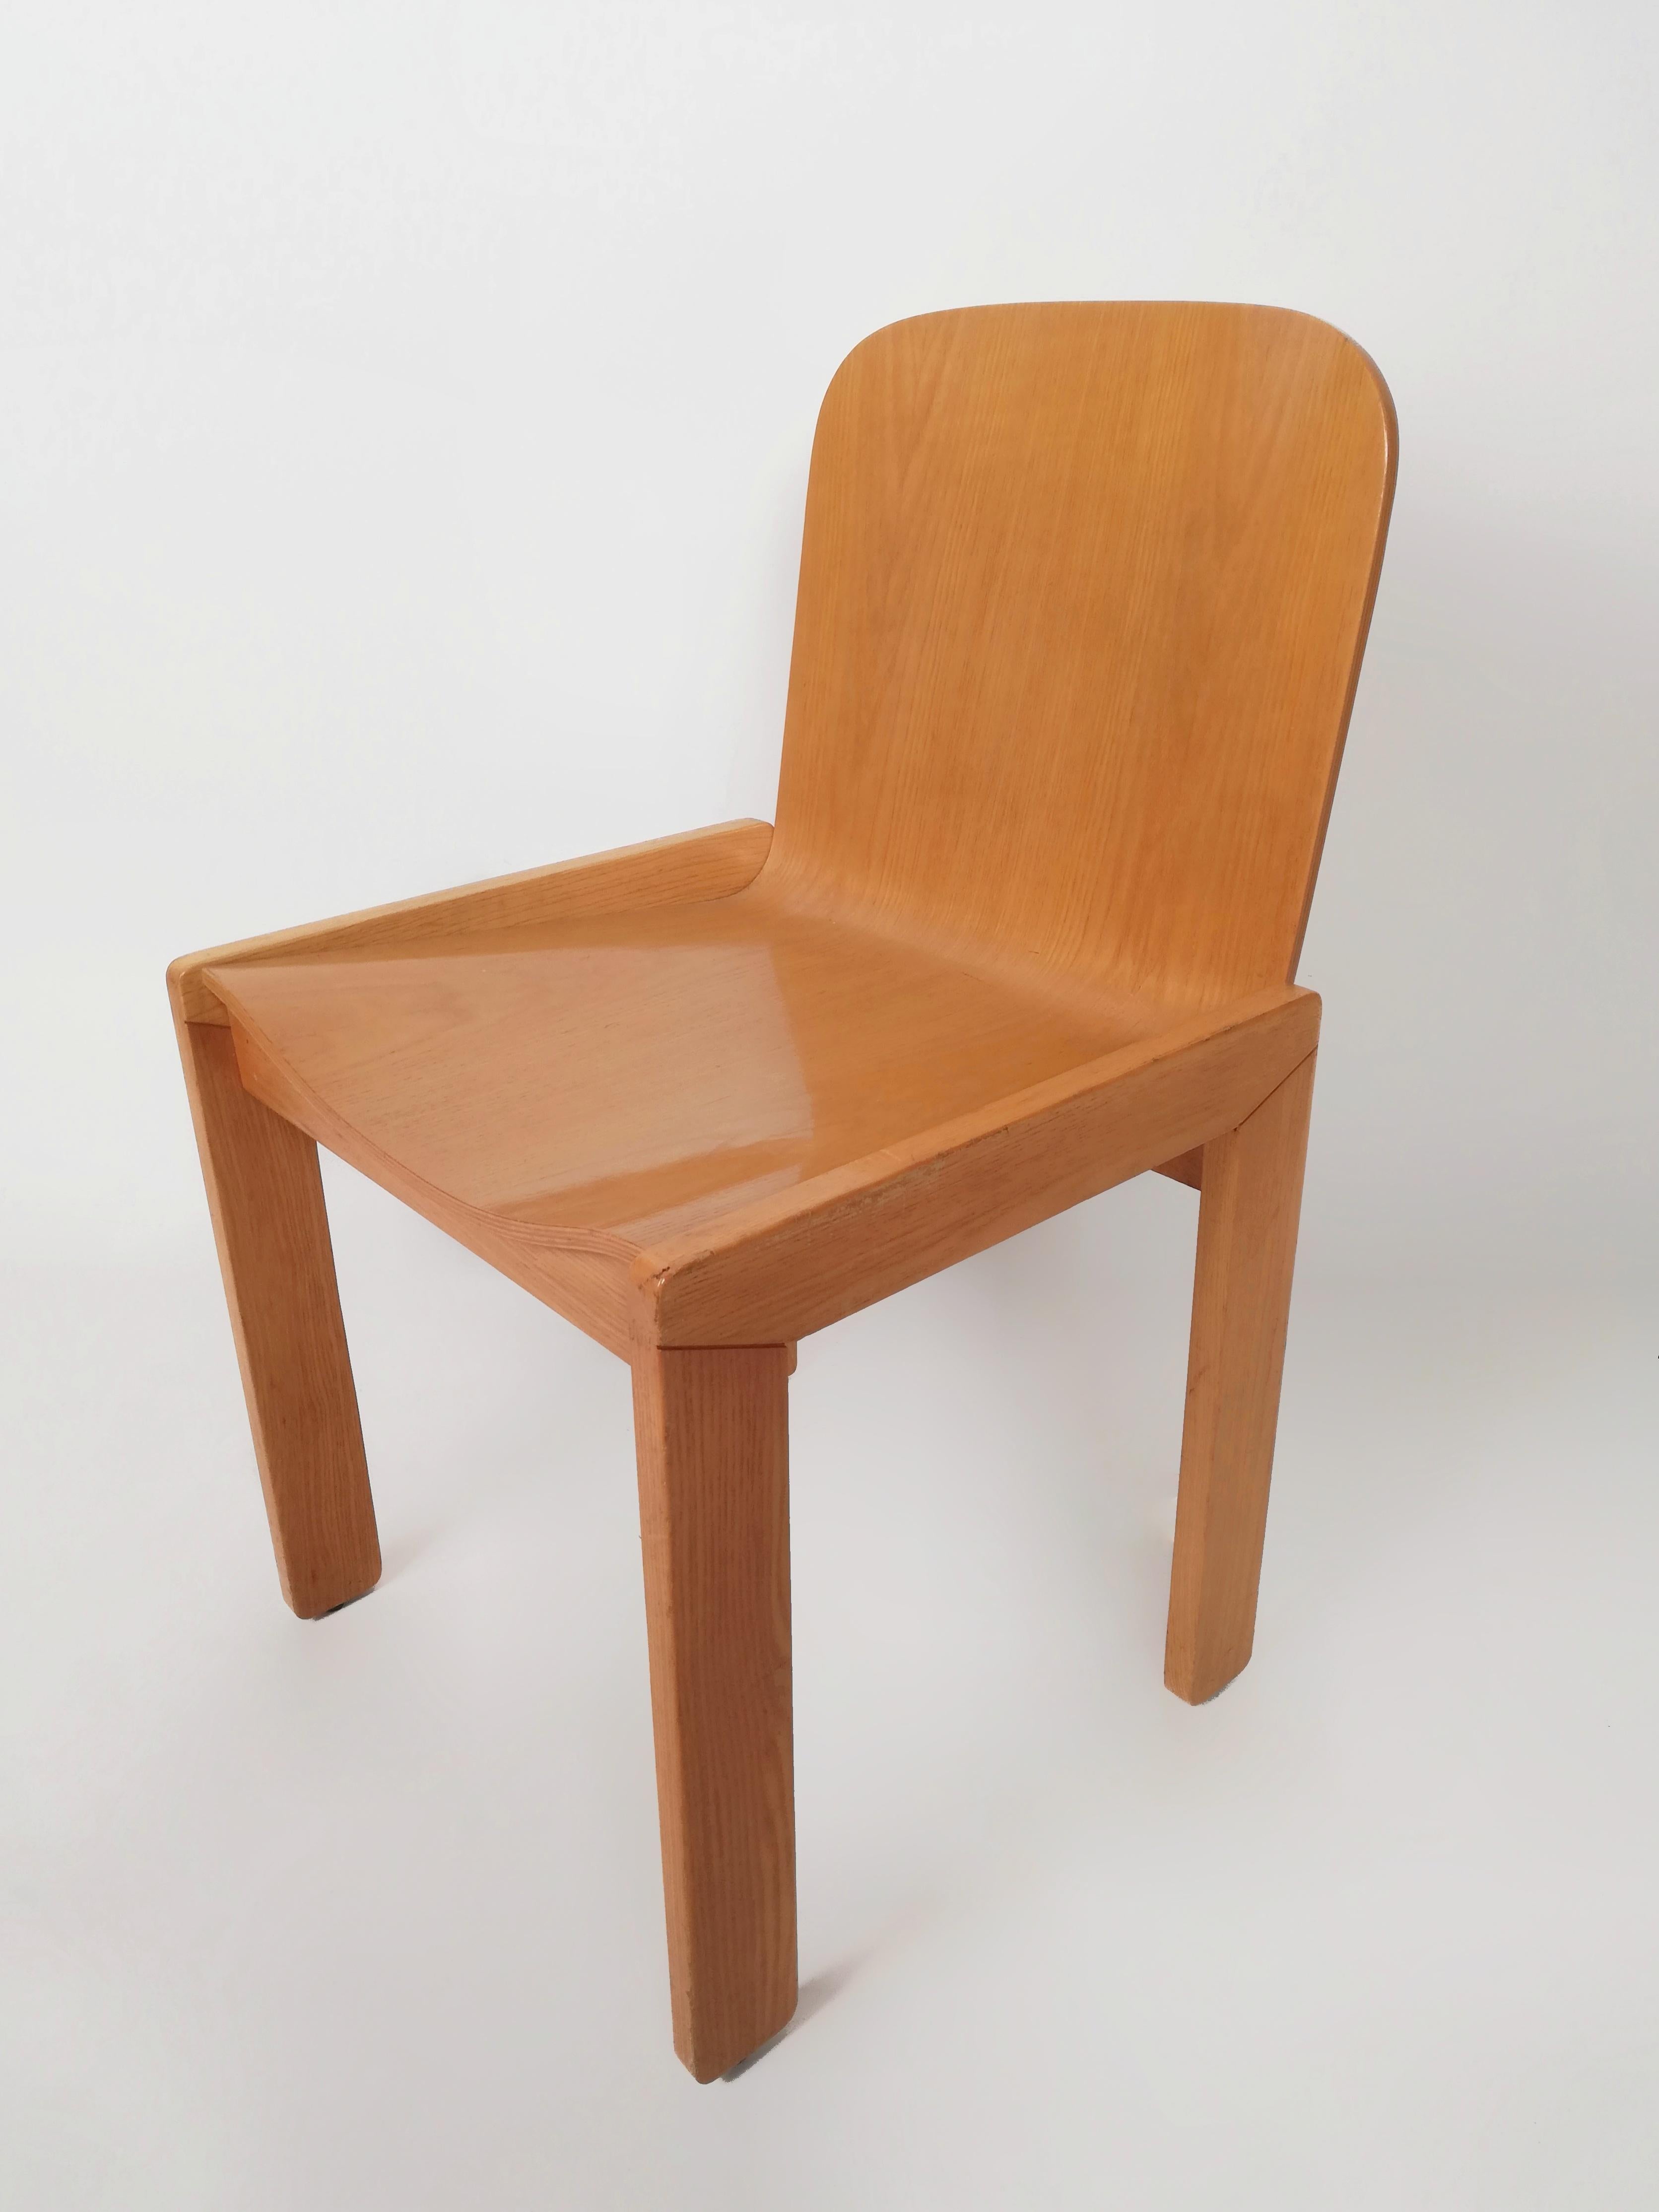 6 Curved Plywood Dining Chairs by Molteni in the style of Scarpa, Italy, 1970s For Sale 2